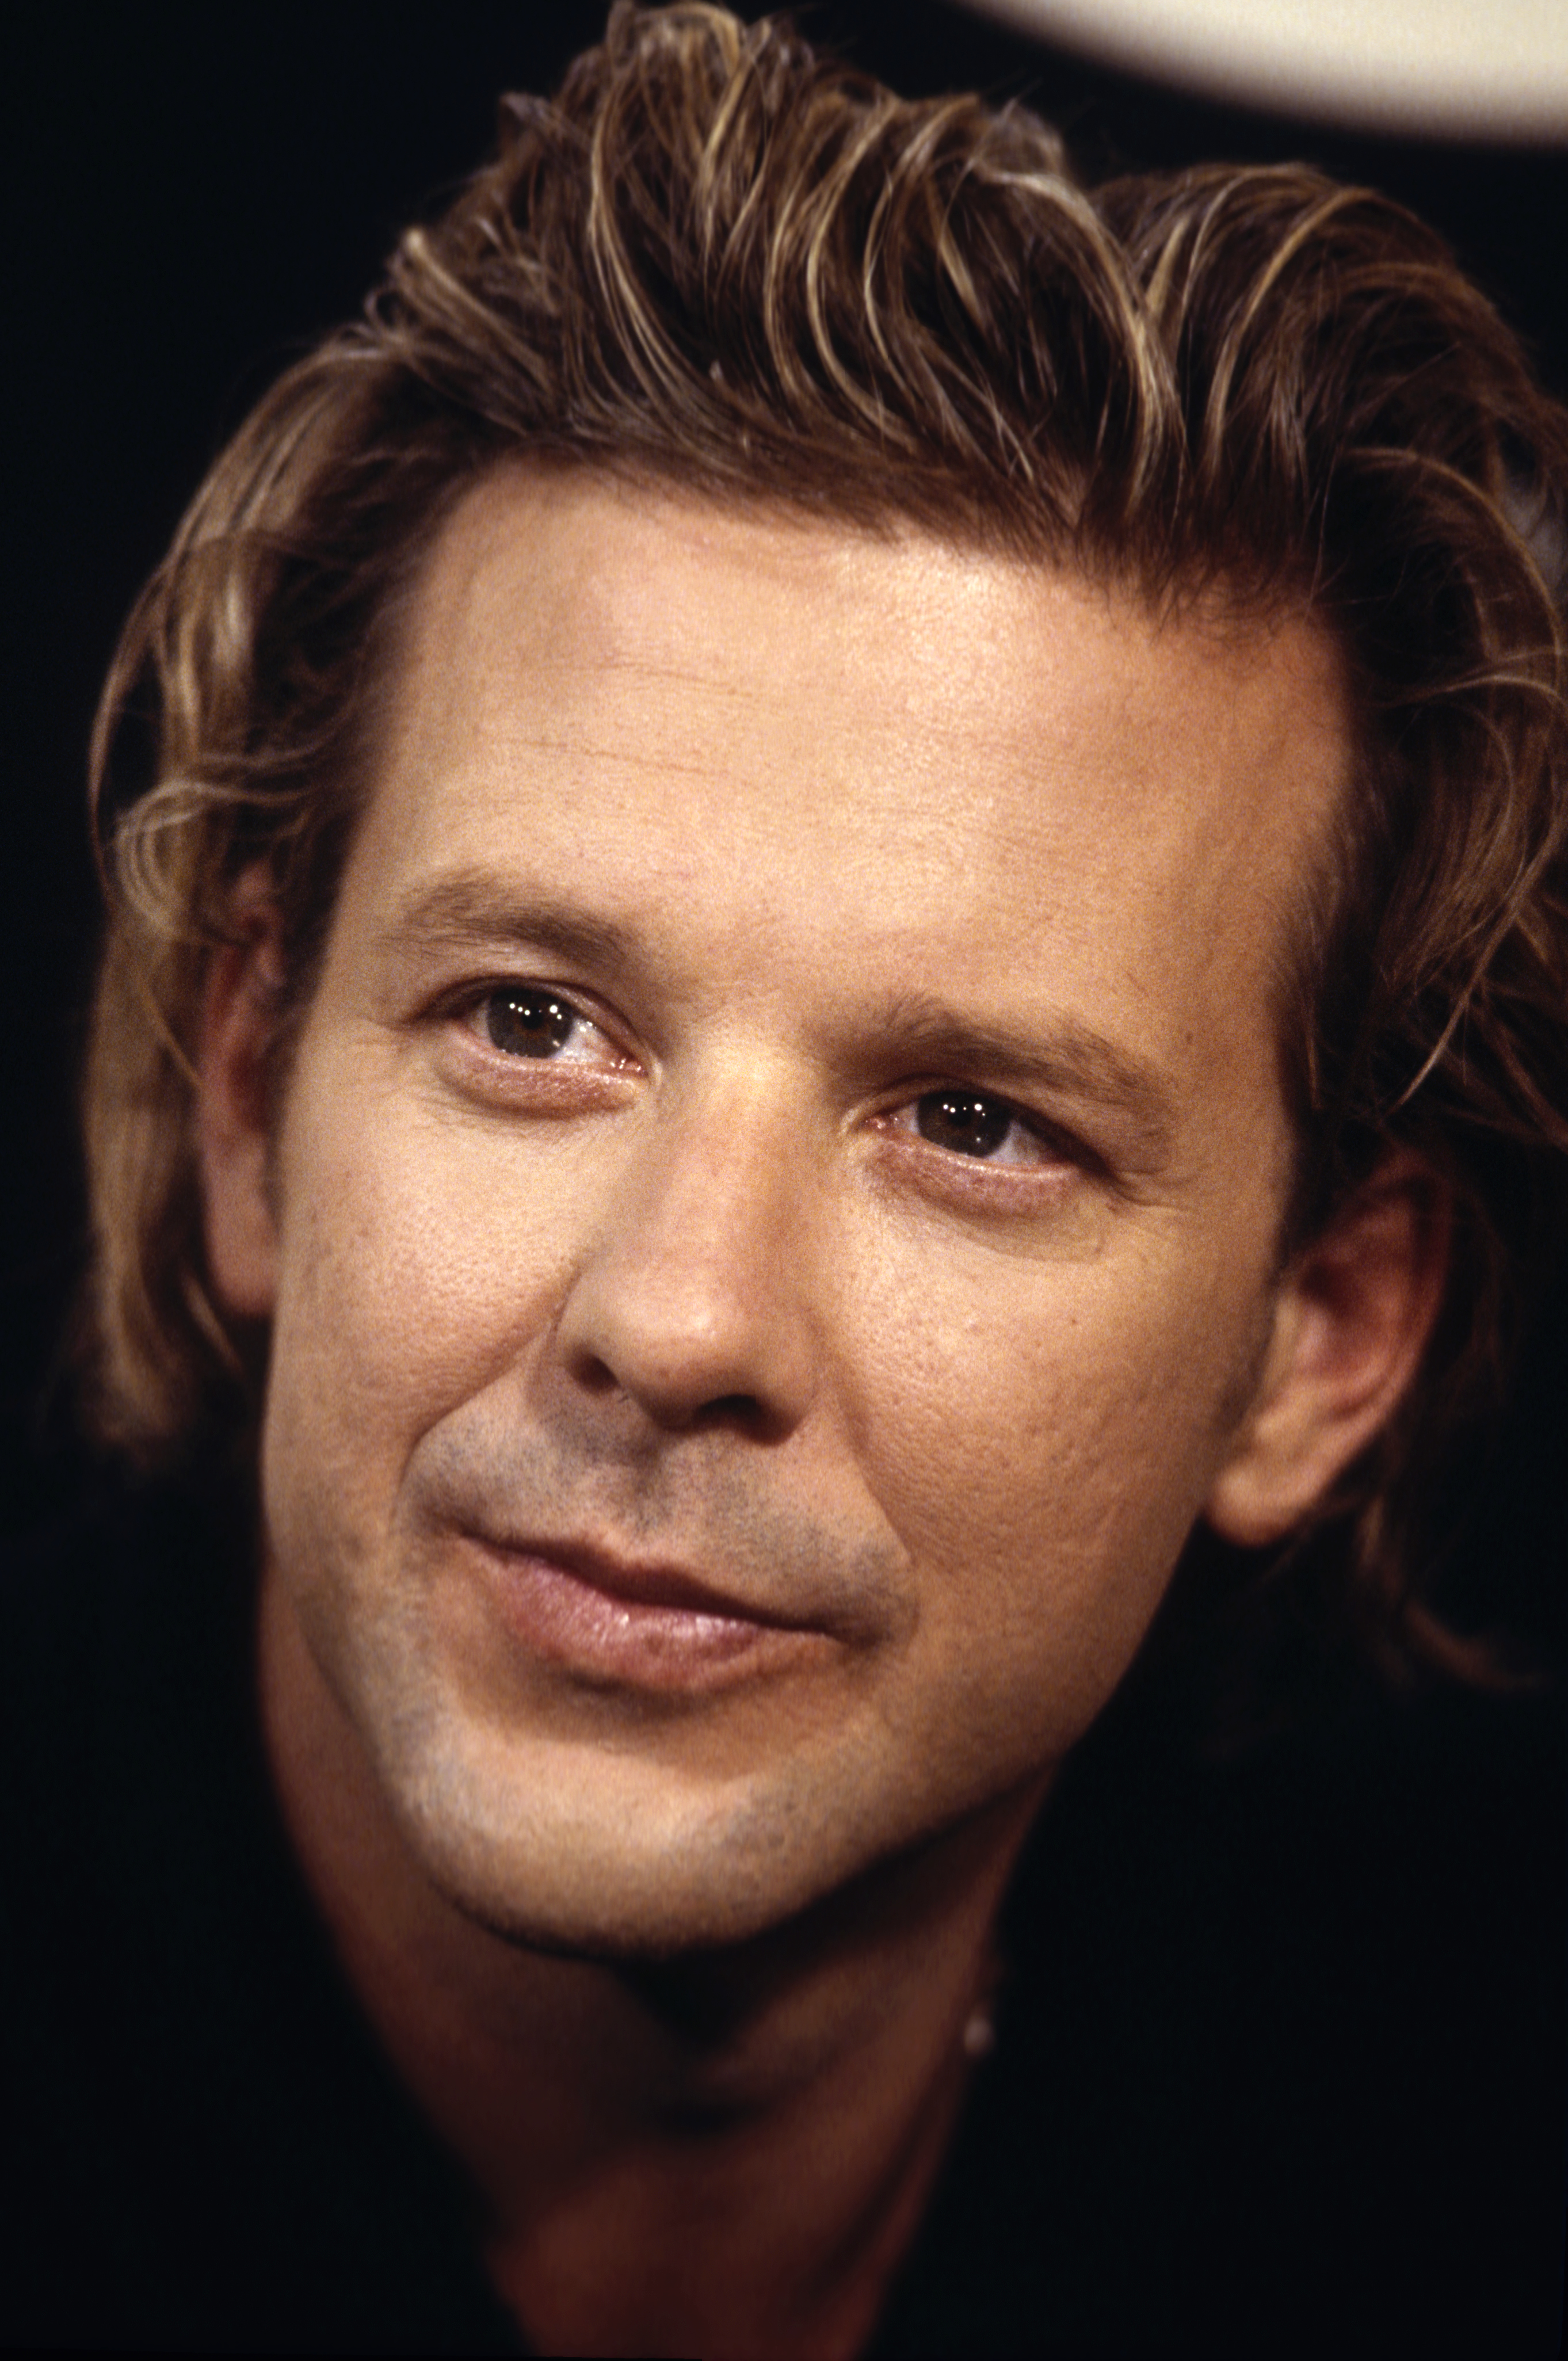 An undated photograph of Mickey Rourke | Source: Getty Images